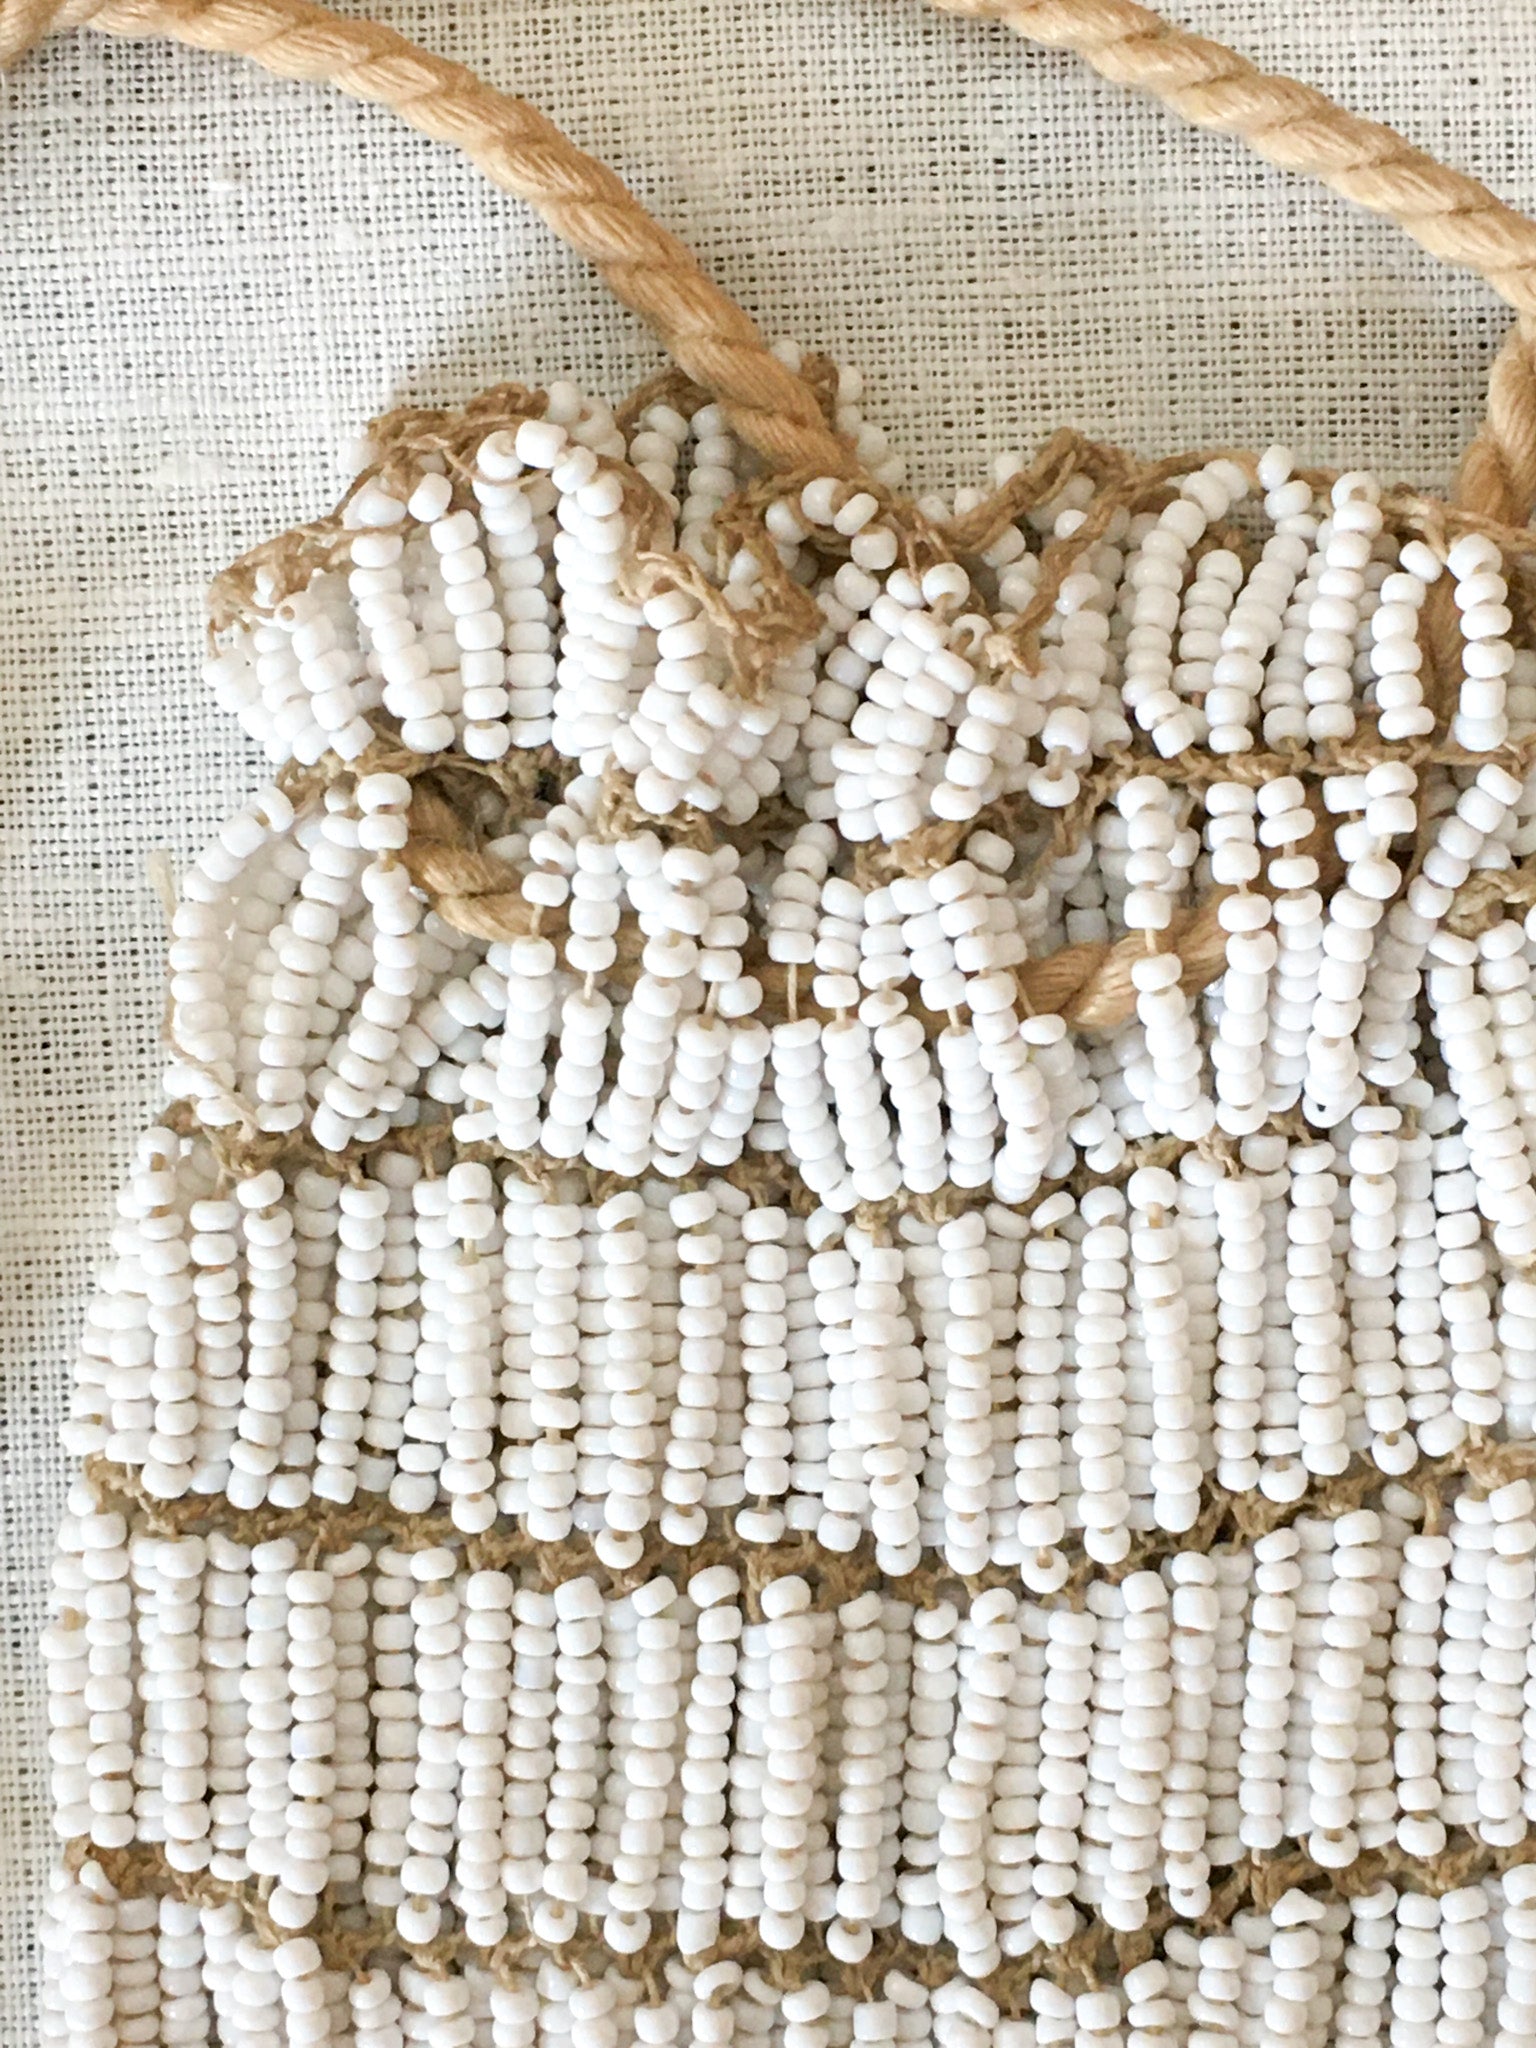 Delicate Beaded Flapper Purse